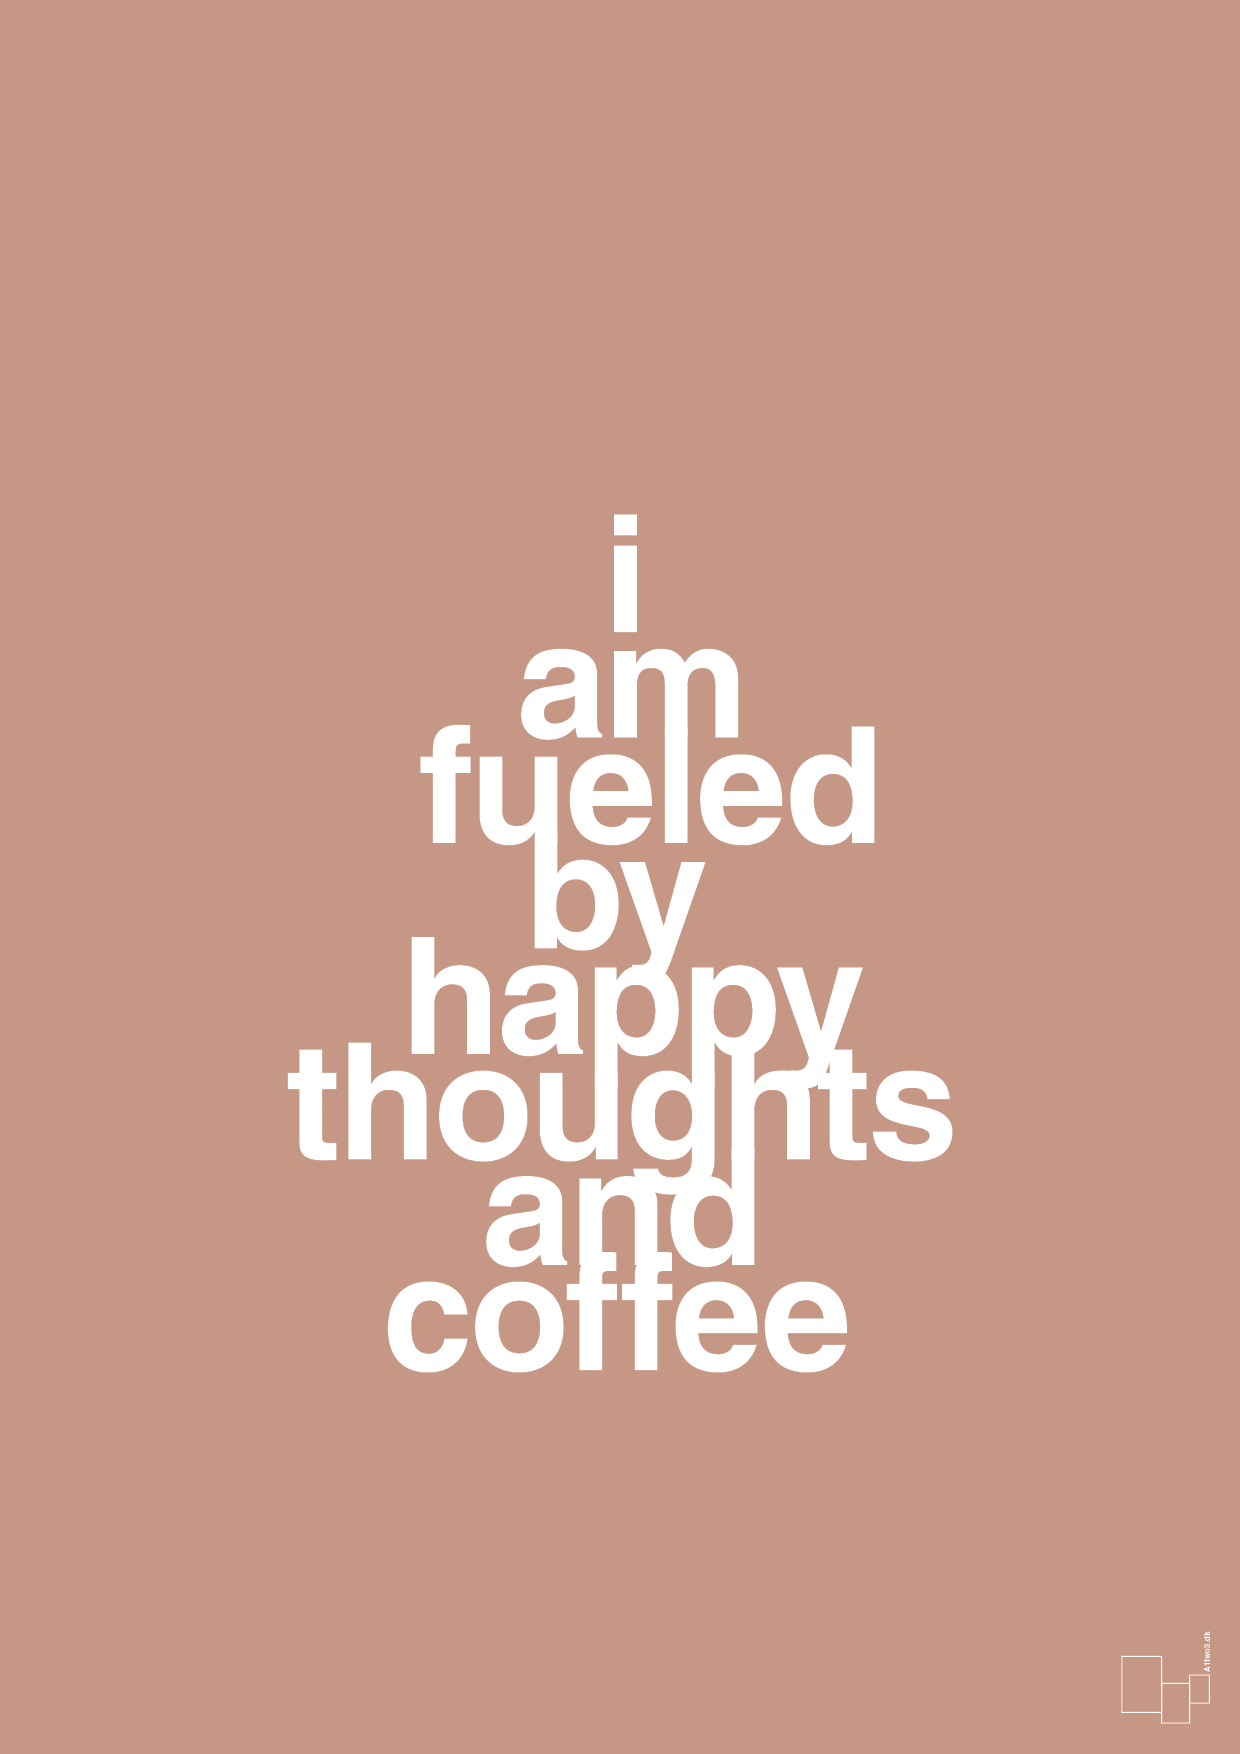 i am fueled by happy thoughts and coffee - Plakat med Mad & Drikke i Powder